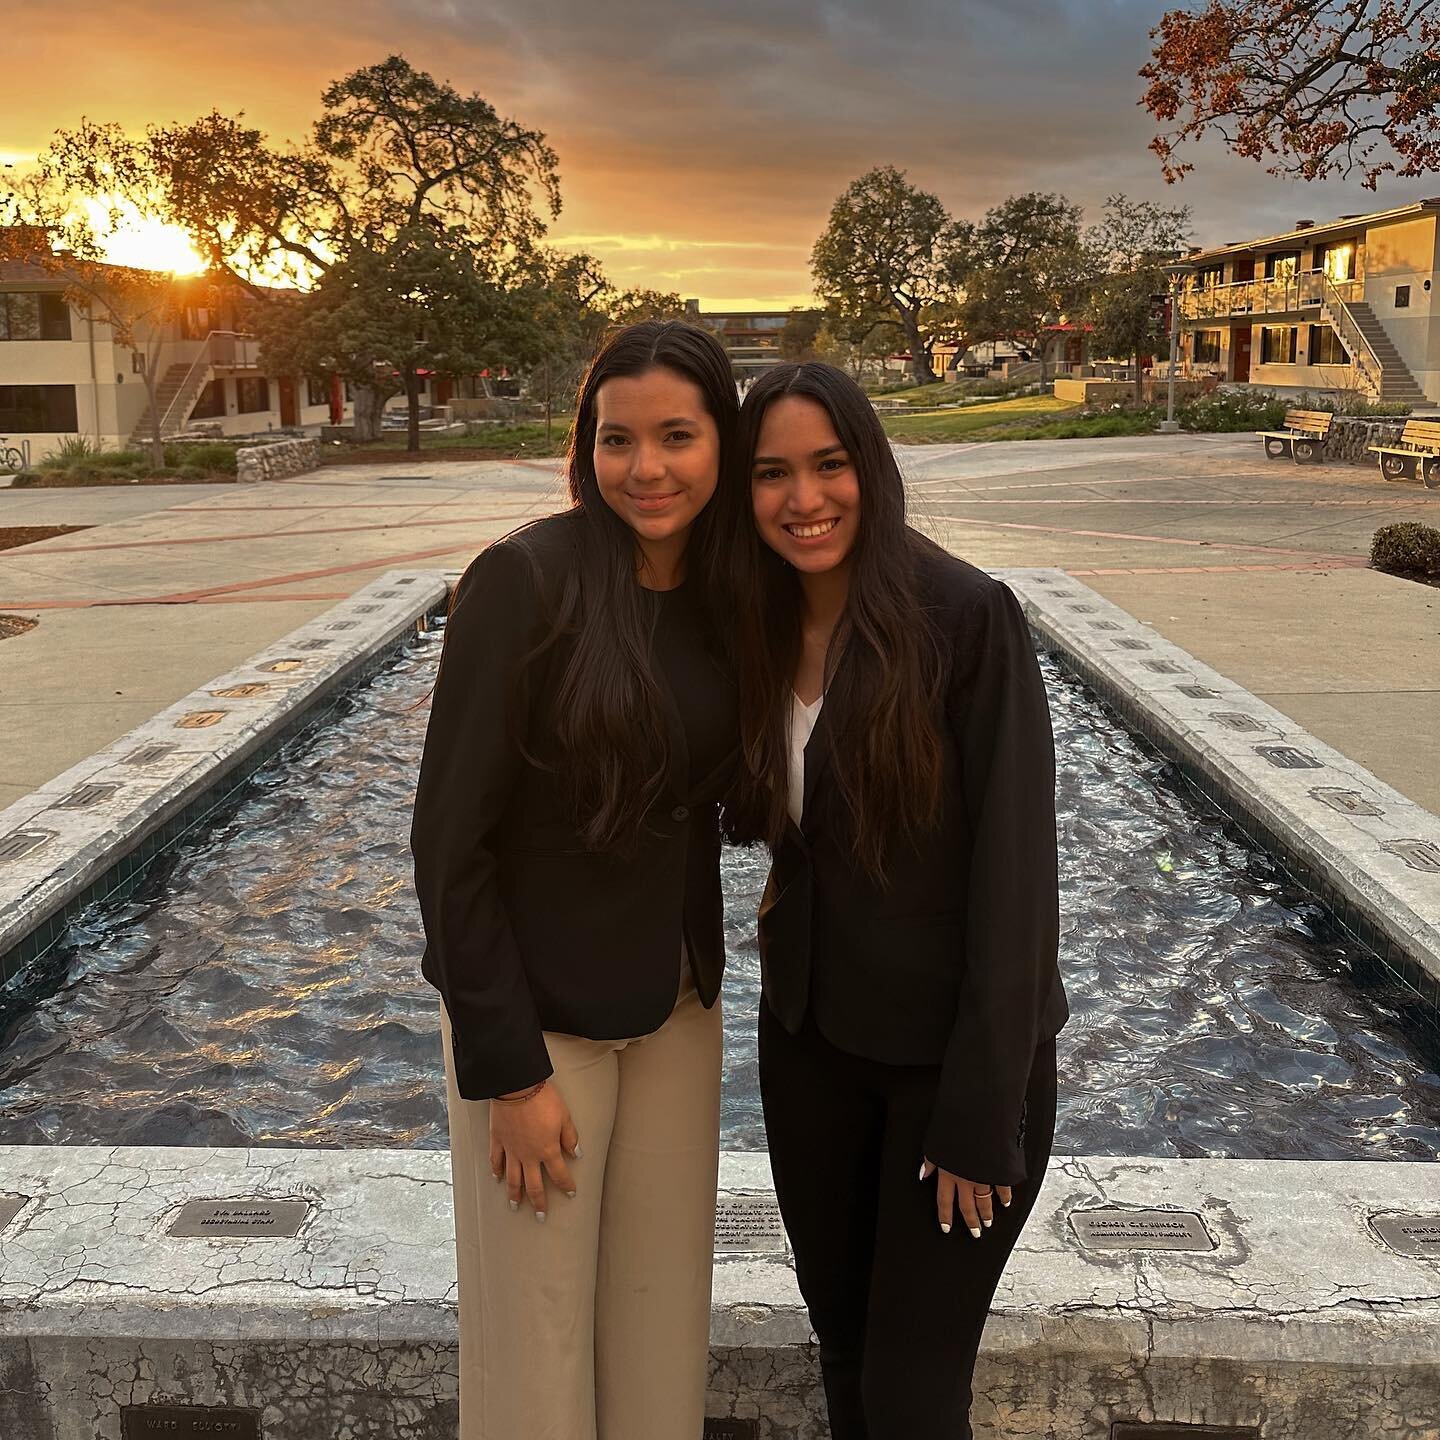 it&rsquo;s time for our second MOCK CRUSH MONDAY with jenna and jazlyn‼️

&ldquo;We have the same last name and convinced everybody we were cousins when that whole time we had definitely just met in mock (sorry guys). But now we&rsquo;re besties for 